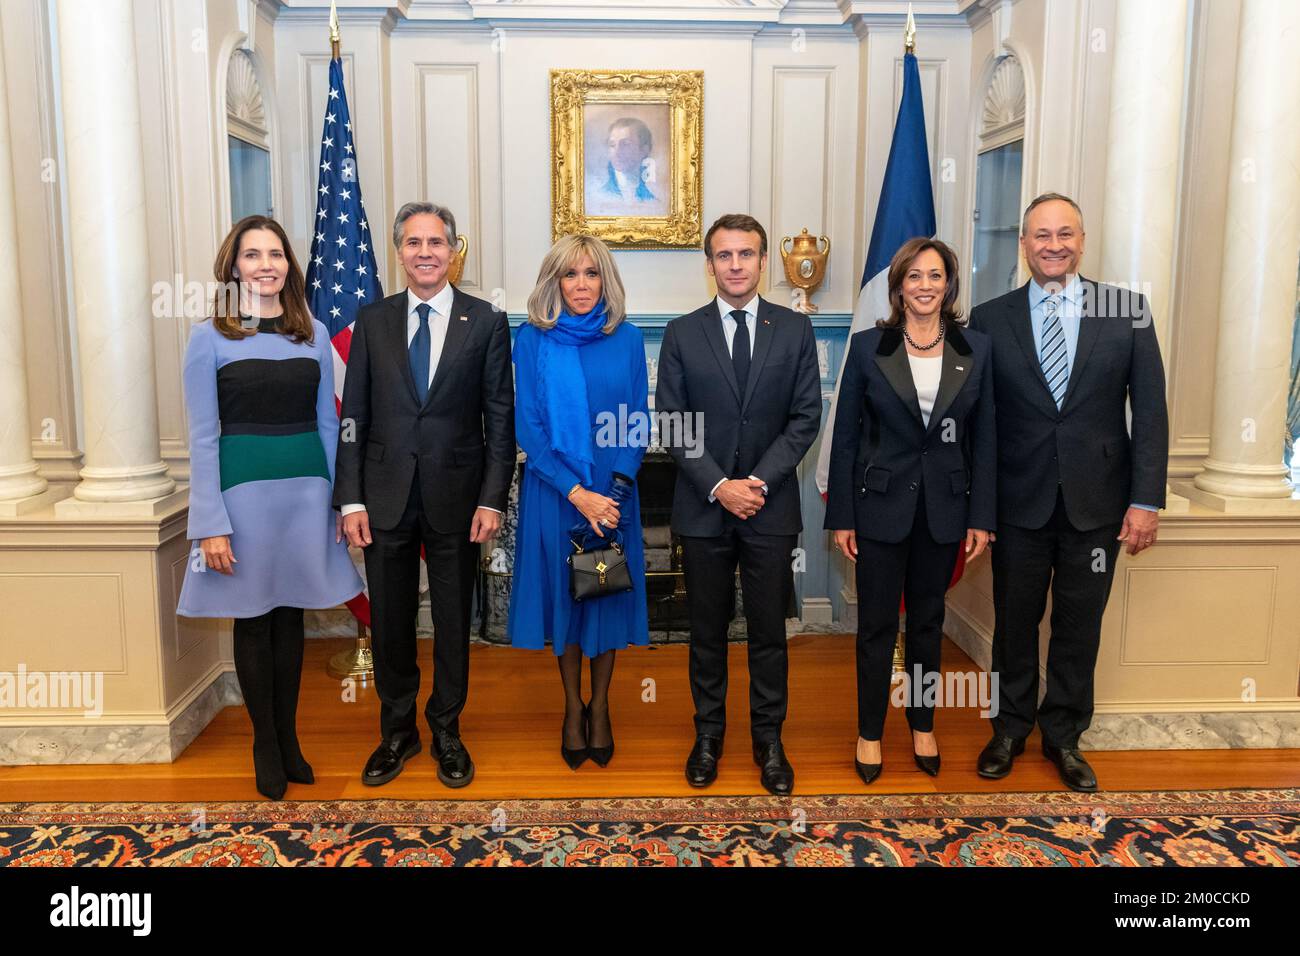 Evan Ryan, Secretary Blinken, French First Lady Macron, French President Macron, Vice President Harris, and Second Gentleman Emhoff Pose for a Photo From left to right, Secretary of State Antony J. Blinken, Evan Ryan, French First Lady Brigitte Macron, French President Emmanuel Macron, Vice President Kamala Harris, and Second Gentleman Doug Emhoff pose for a photo before the State Luncheon in honor of the French President at the U.S. Department of State in Washington, D.C., on December 1, 2022. [State Department Photo by Ron Przysucha} Stock Photo